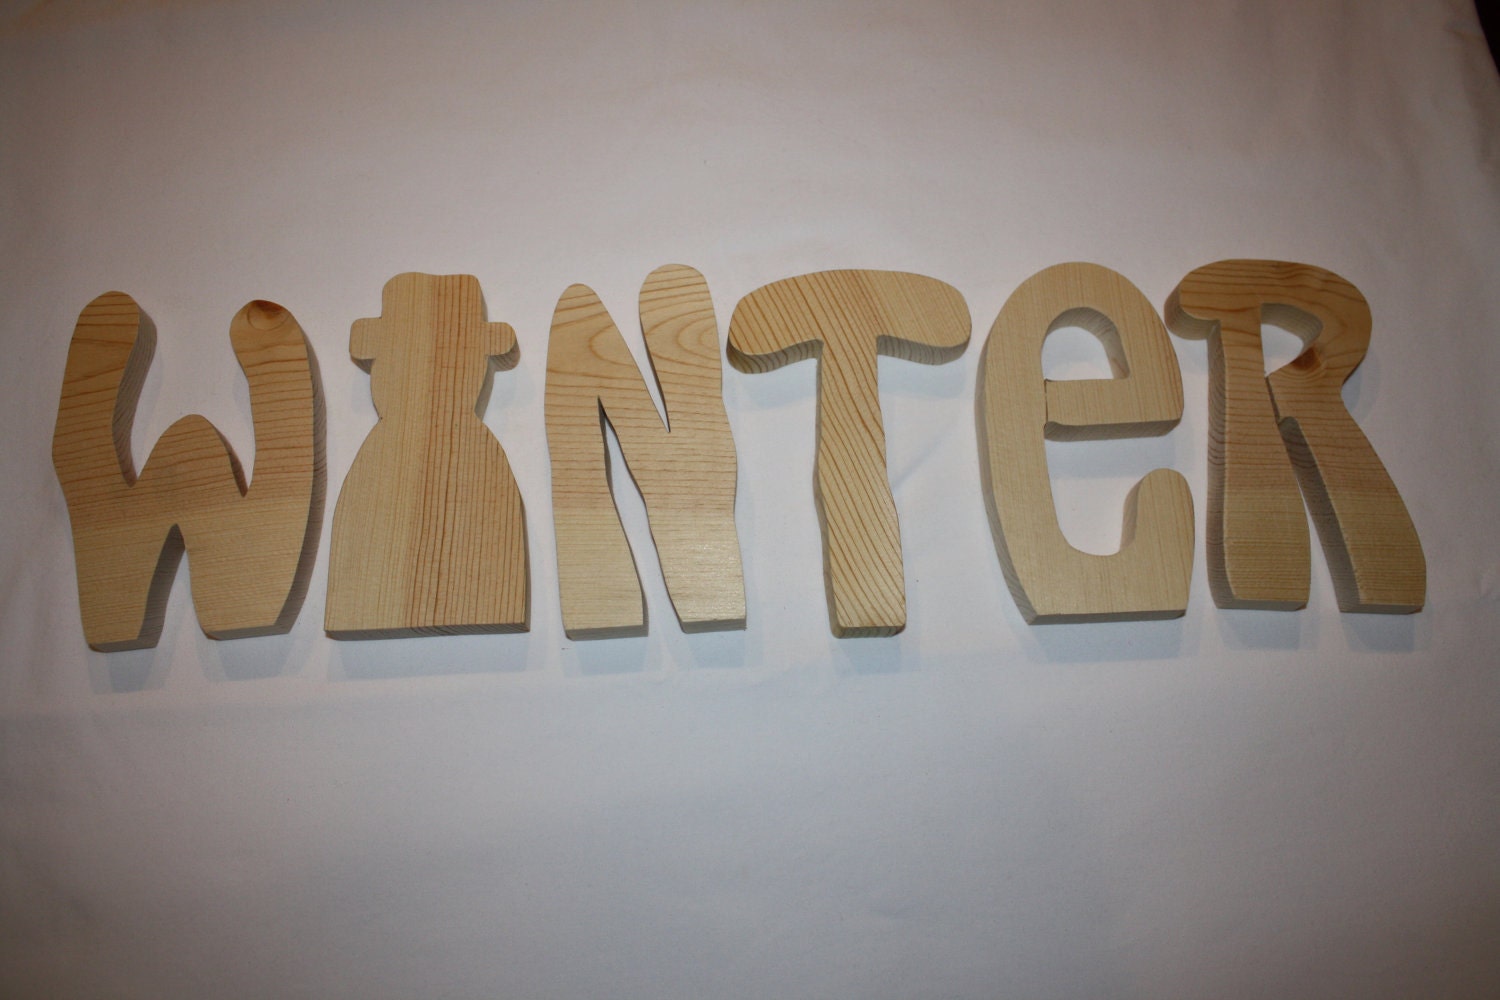 Winter unfinished wood word to decorate you home for the season (6" tall)  small winter